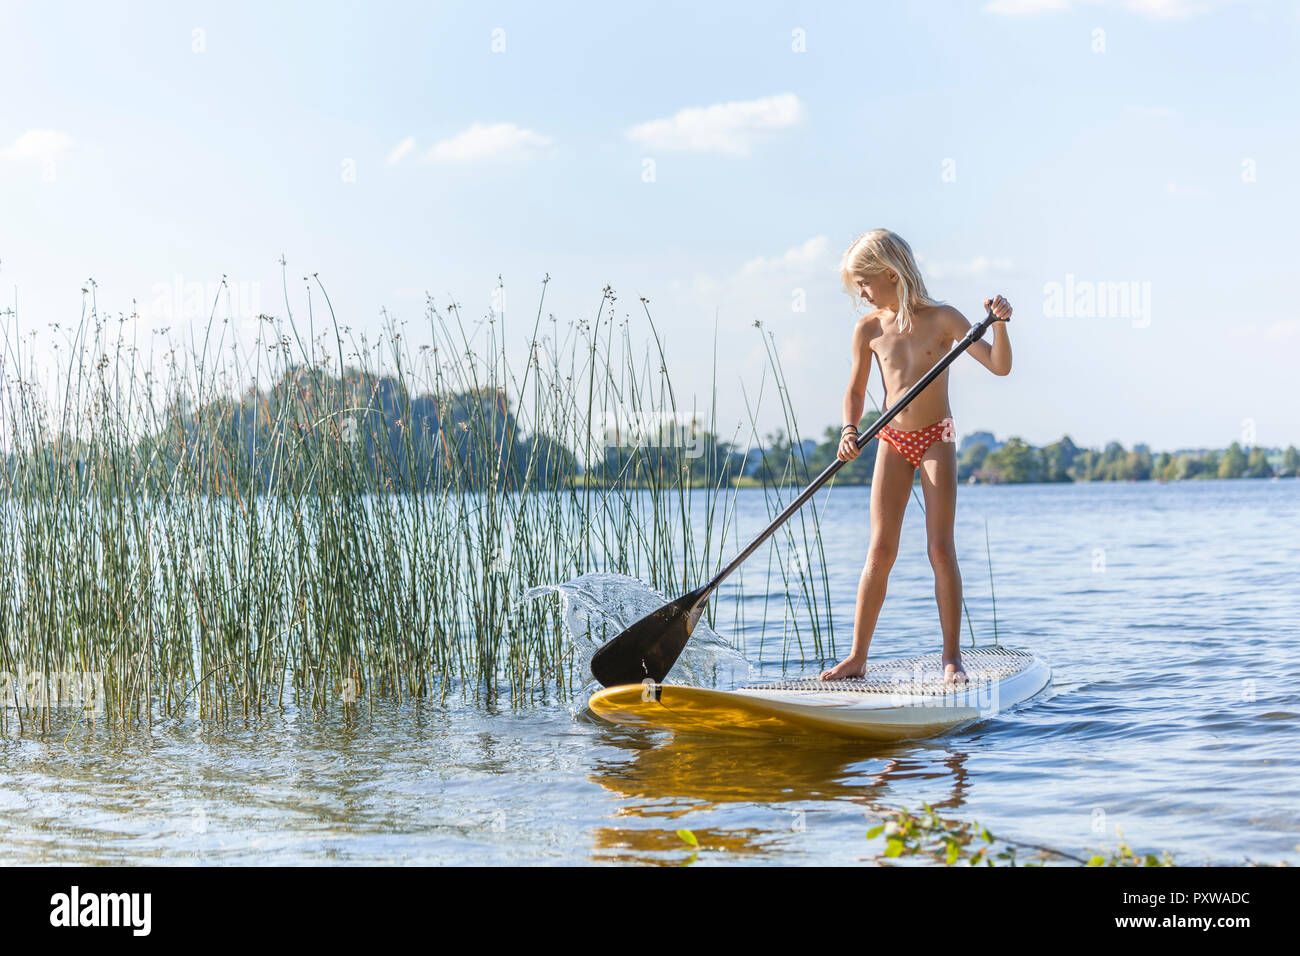 Ragazza giovane stand up paddle surf Foto Stock